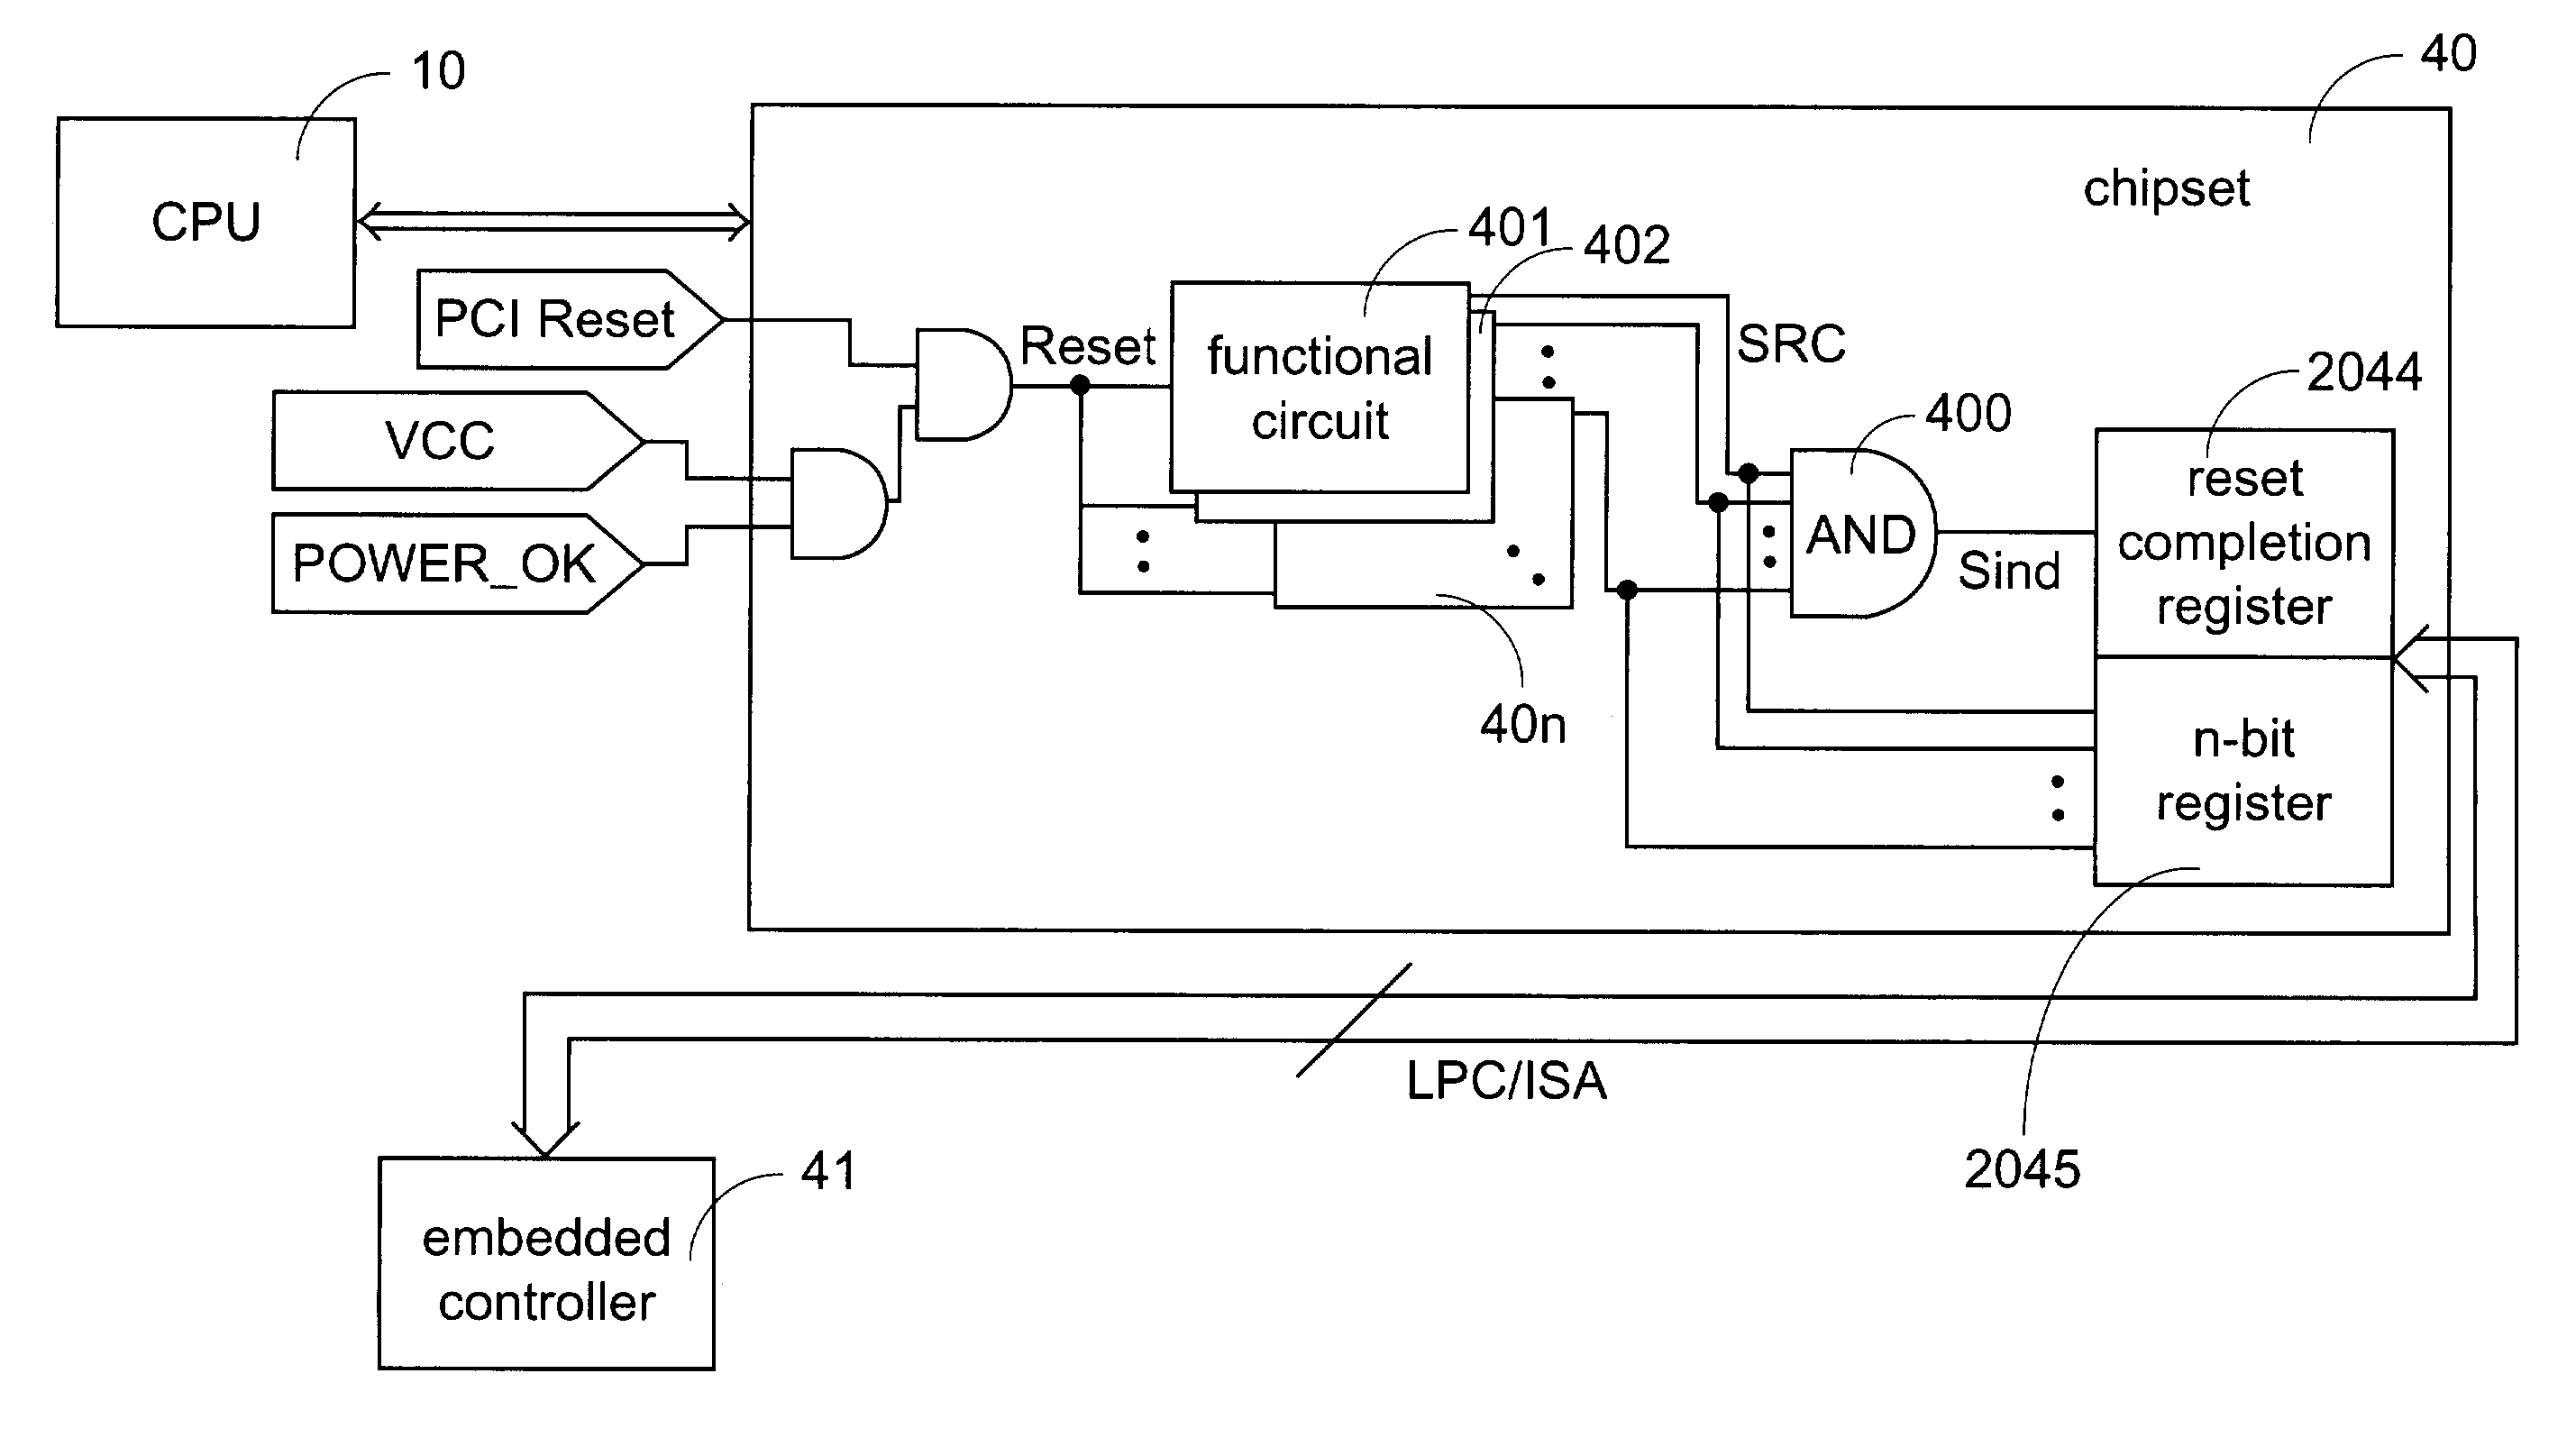 Automatic reset signal generator integrated into chipset and chipset with reset completion indication function